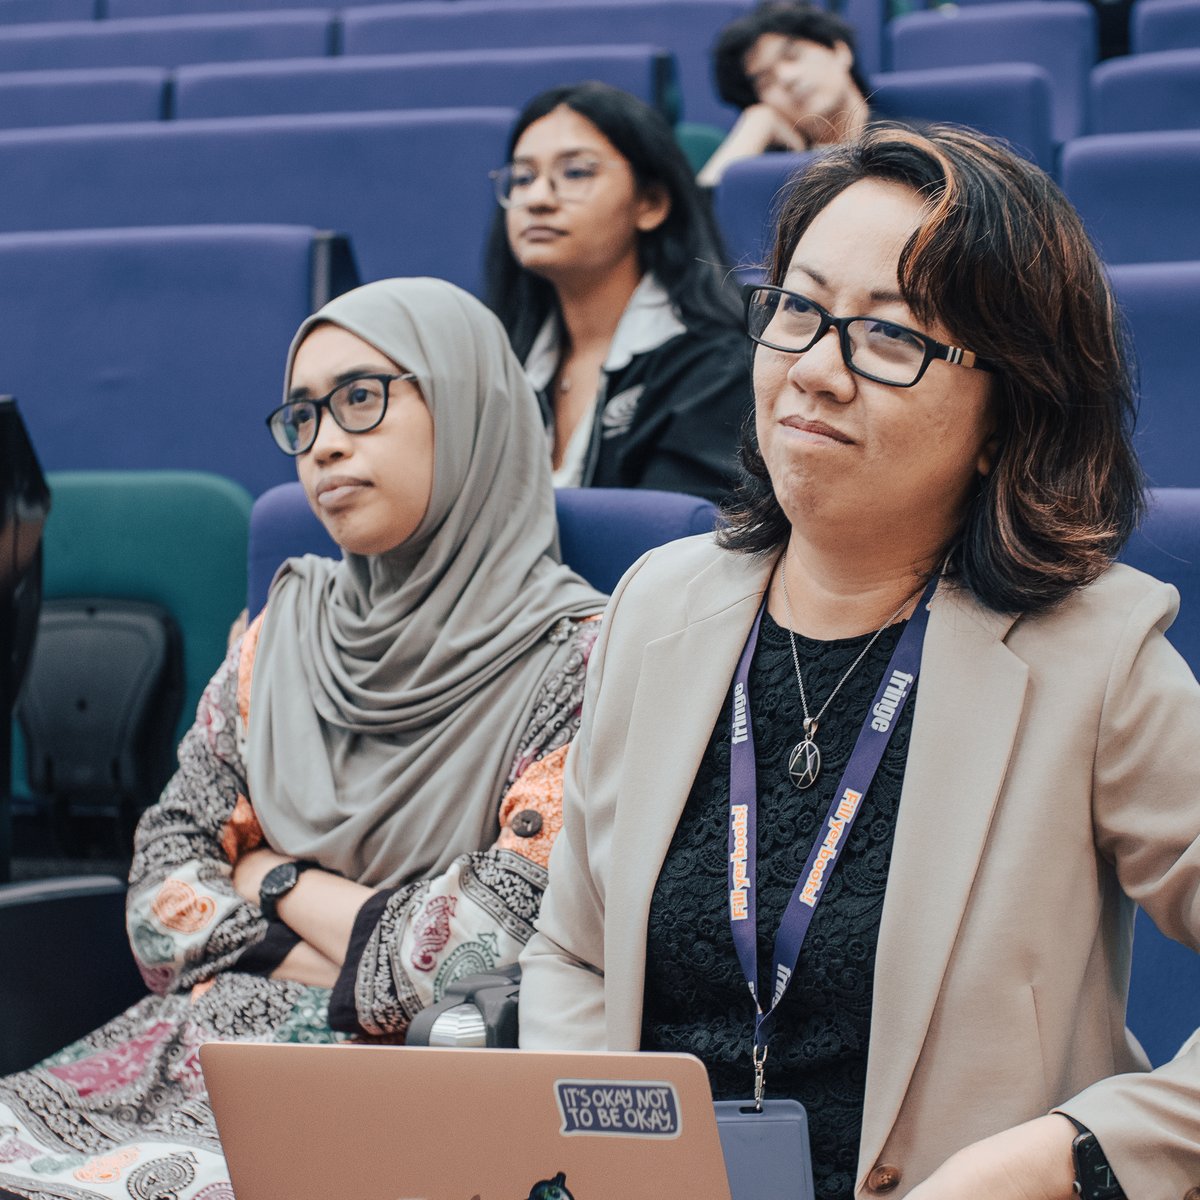 We thank David Goodwin, the Dean of Nottingham University Business School, as well as Wen Li Chan, Associate Professor of Business Law, for inviting us to speak as guest lecturers to final year business students on 20th November! @nubsmalaysia